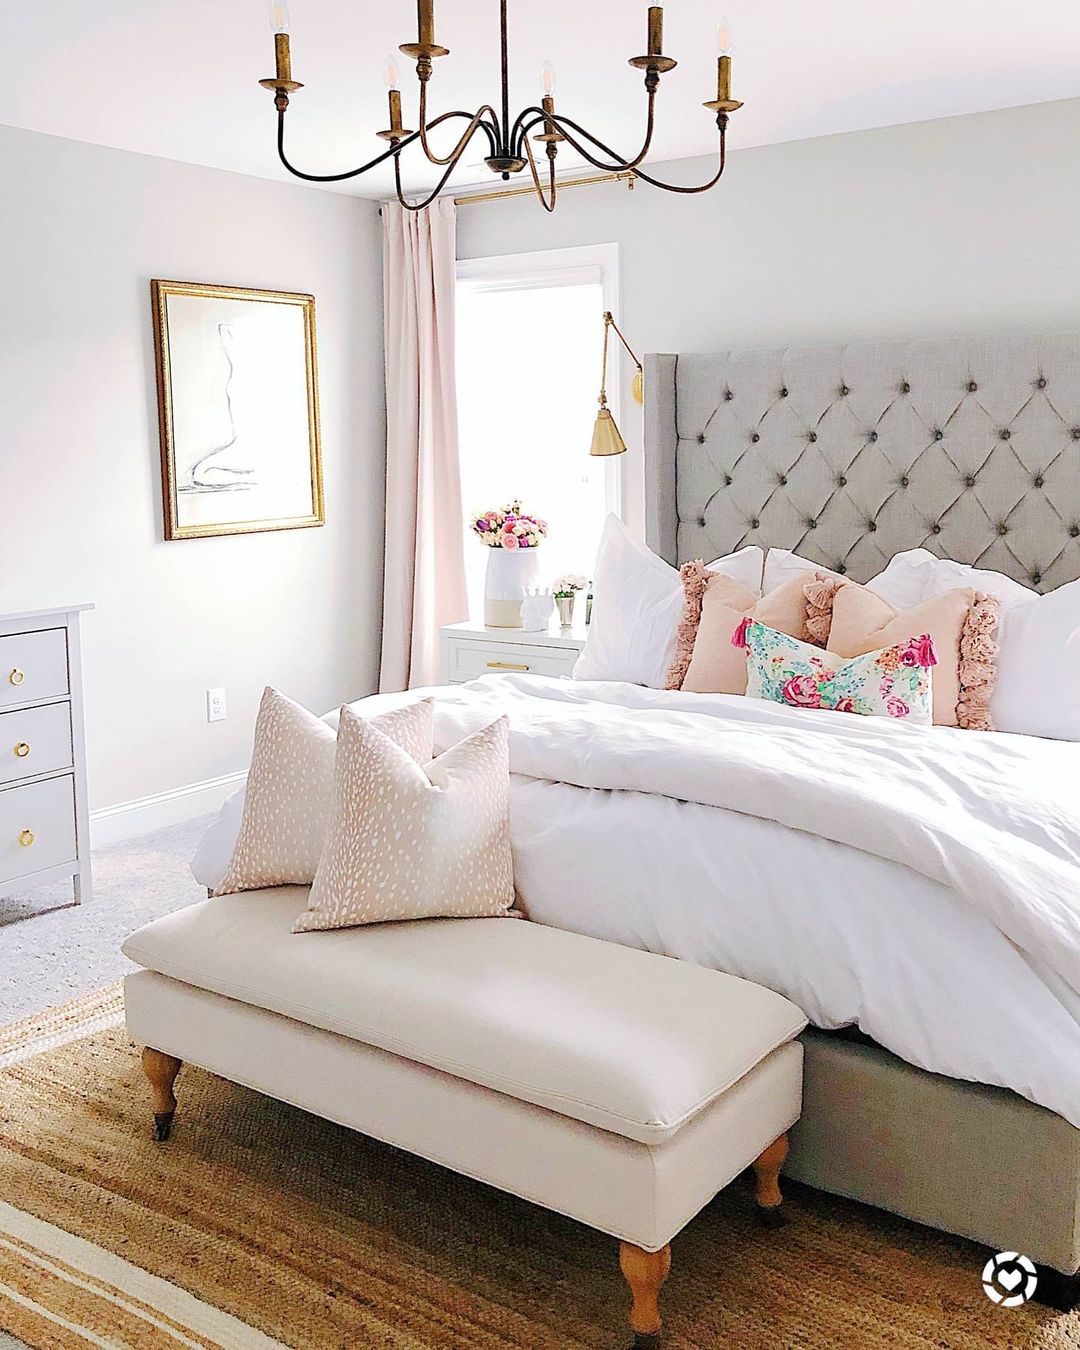 12 Styling Tips to Make the Foot of Your Bed a Functional Space